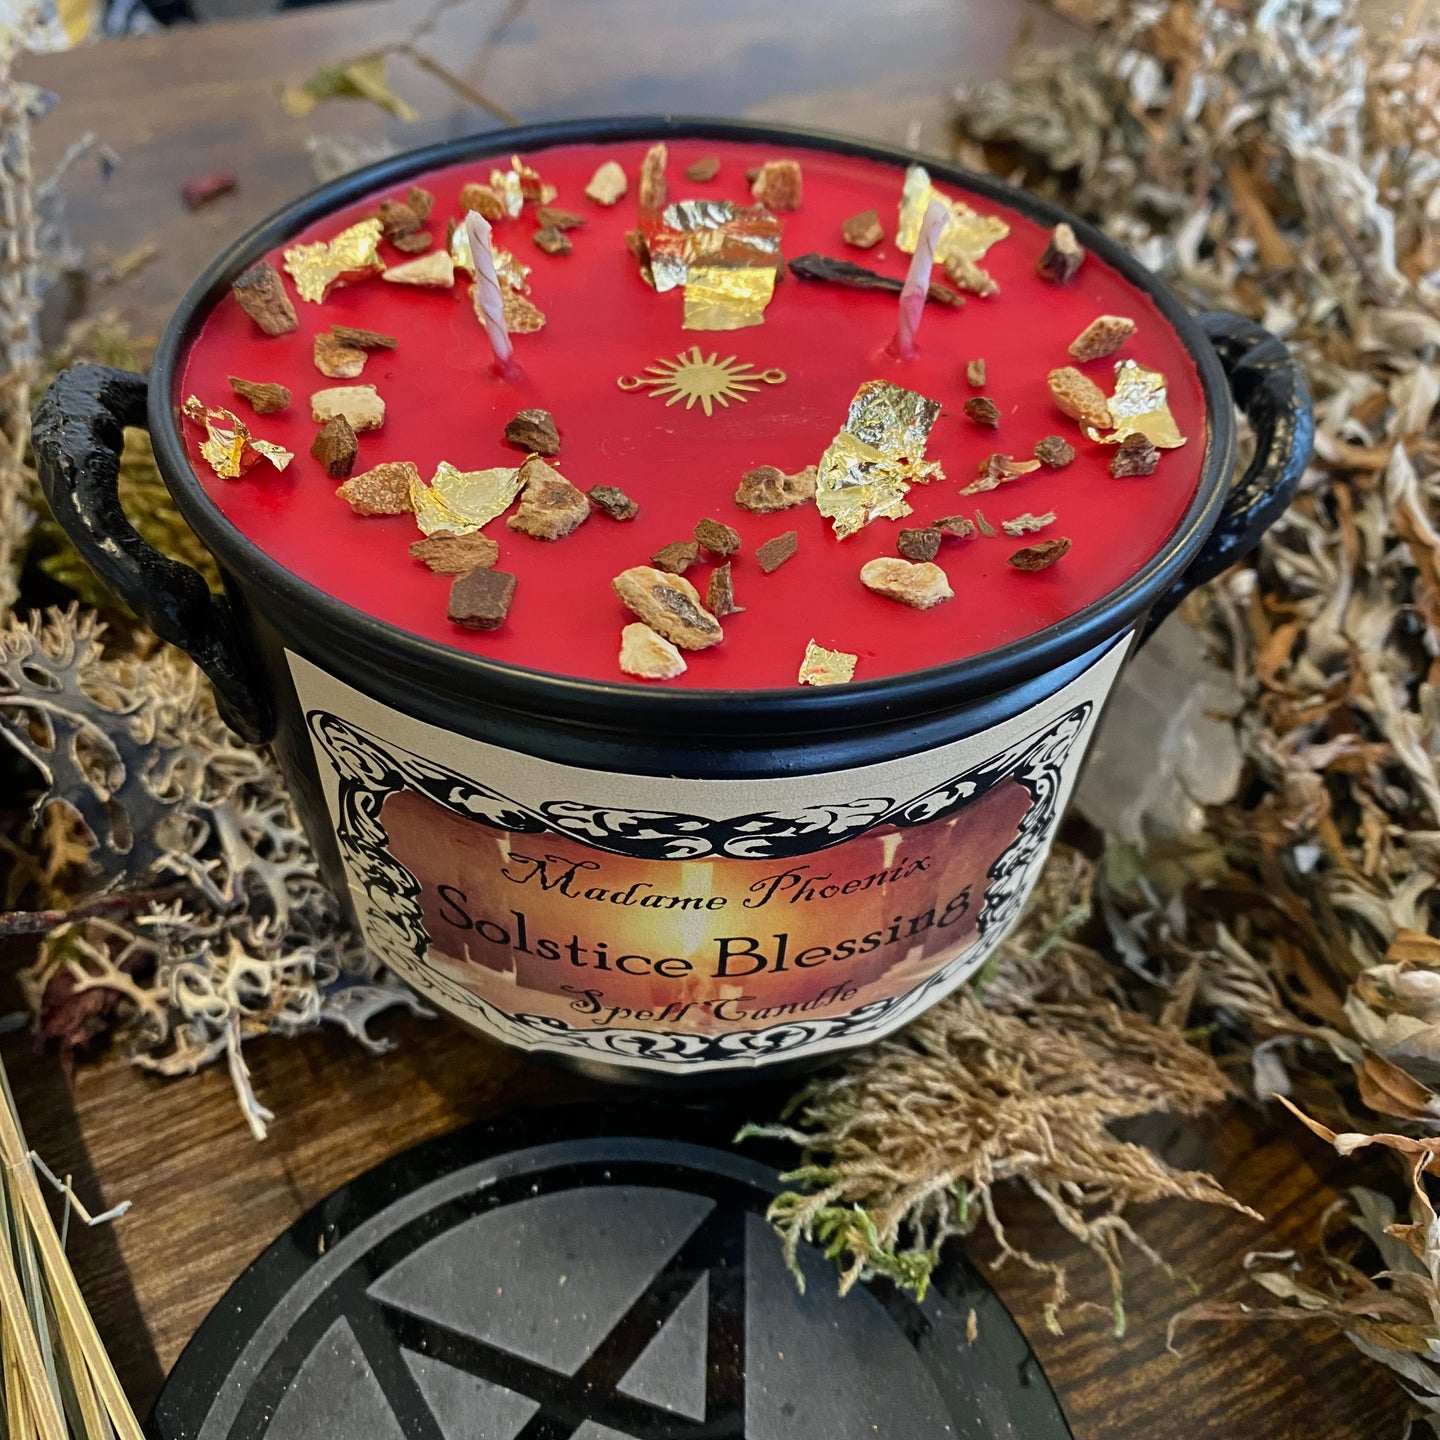 Solstice Blessing Winter Ritual Cauldron Candle